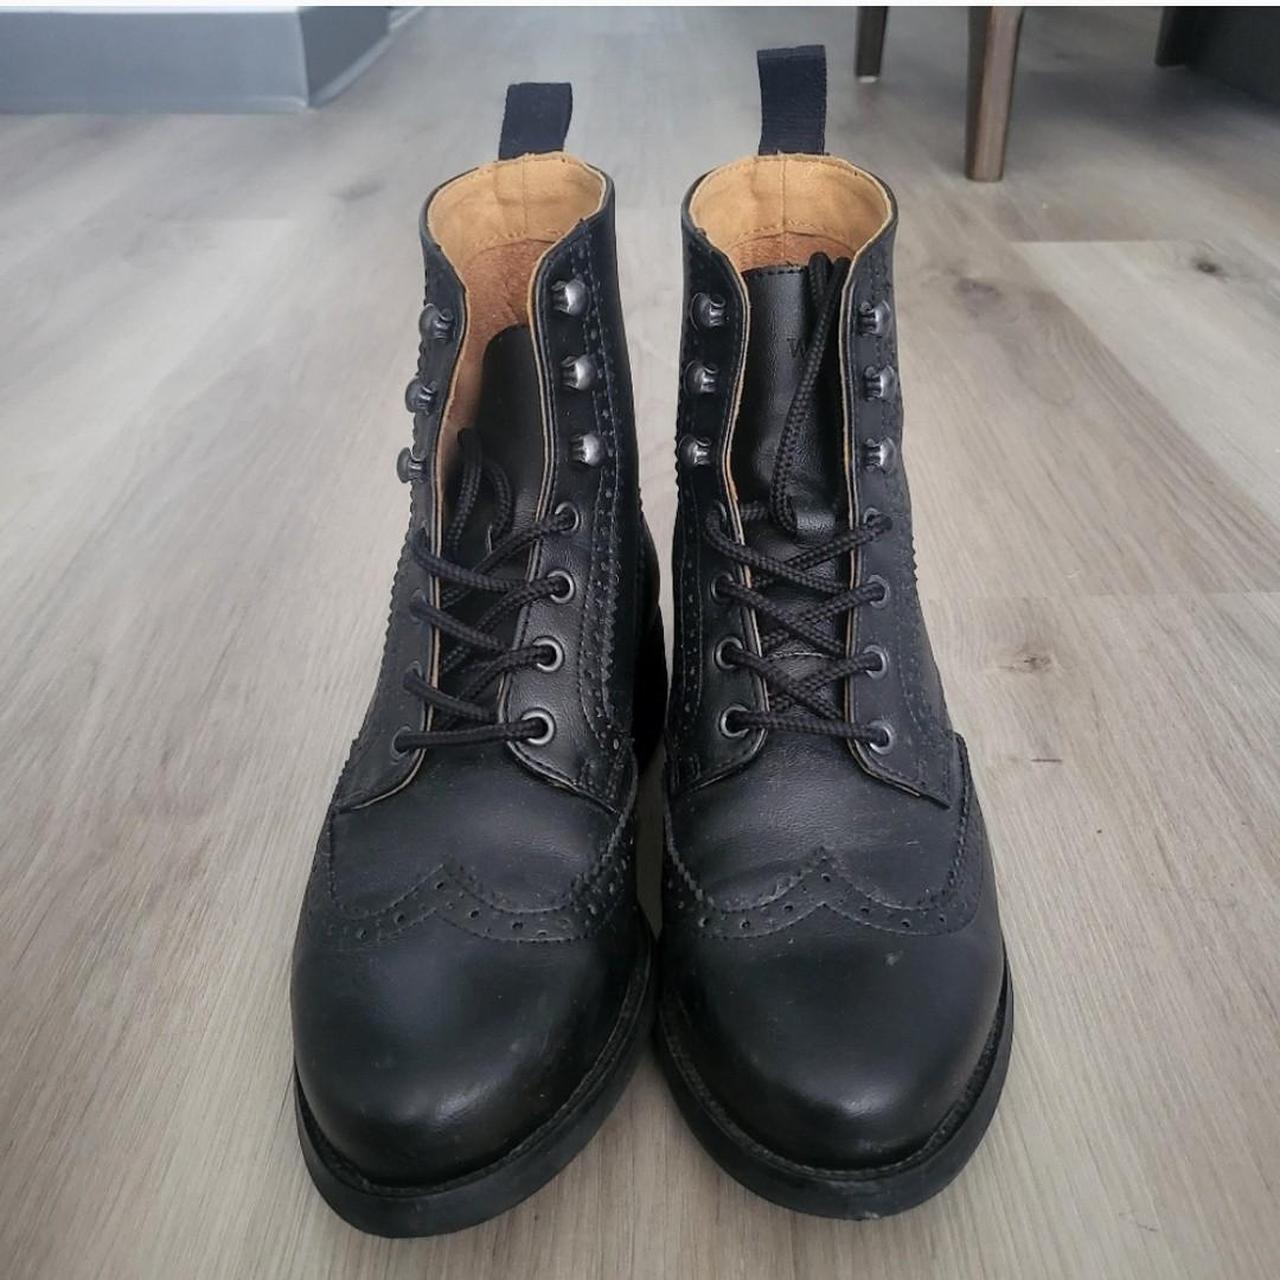 Brogue Boots Wills Vegan Store Made in Portugal Size... - Depop